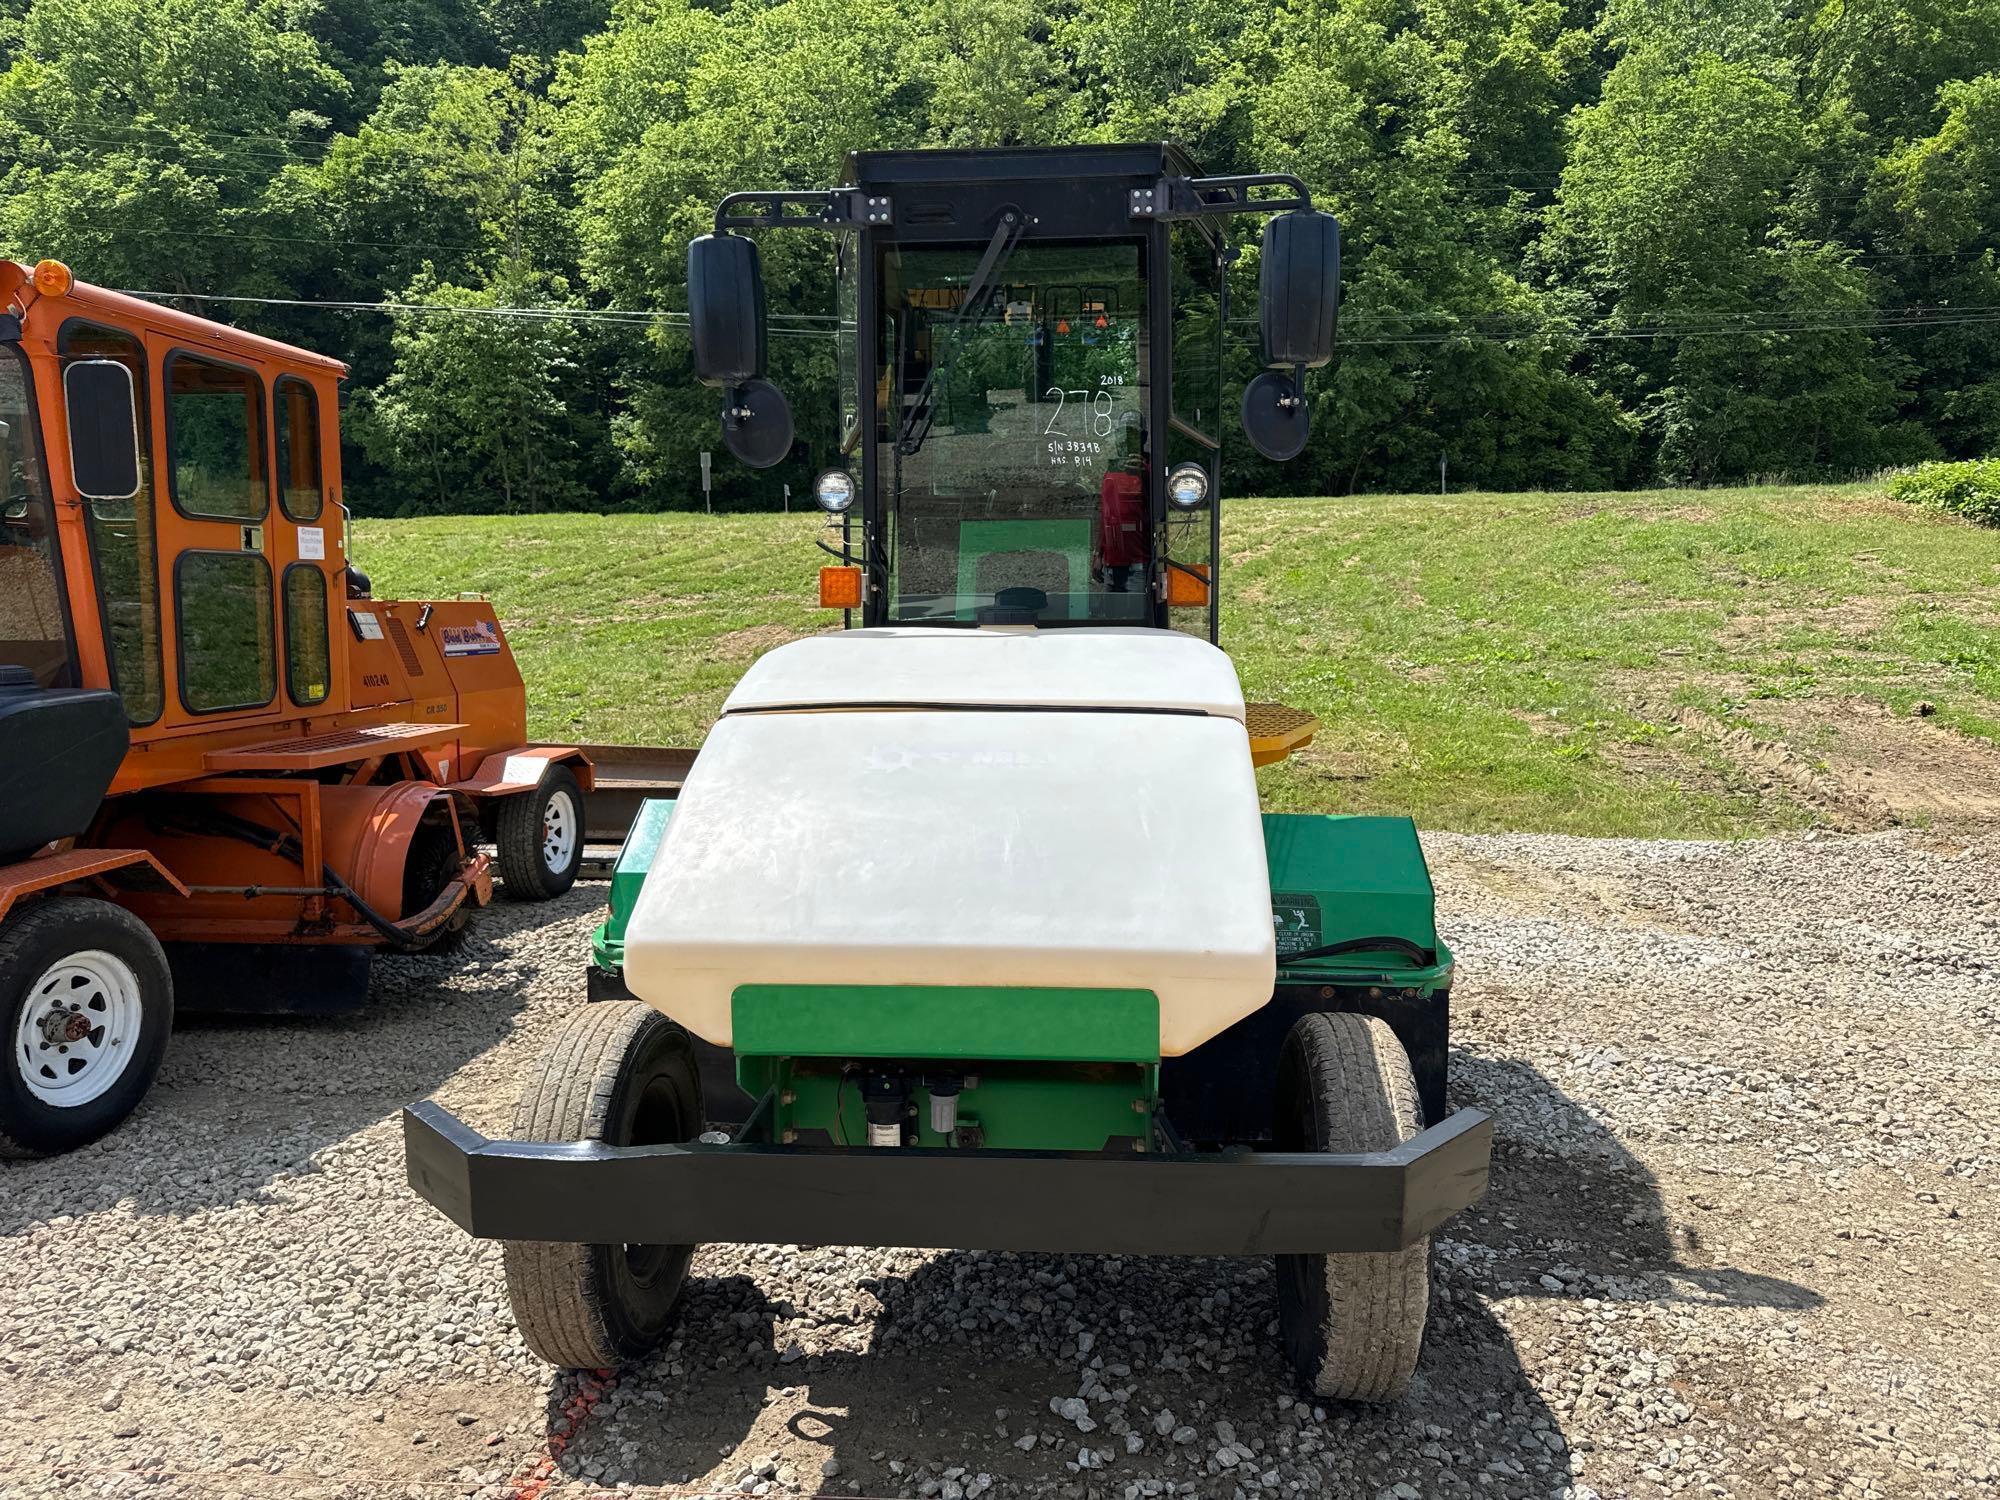 2018 LAYMOR SM450ST SWEEPER SN38398 powered by diesel engine, equipped with EROPS, air, 8ft.